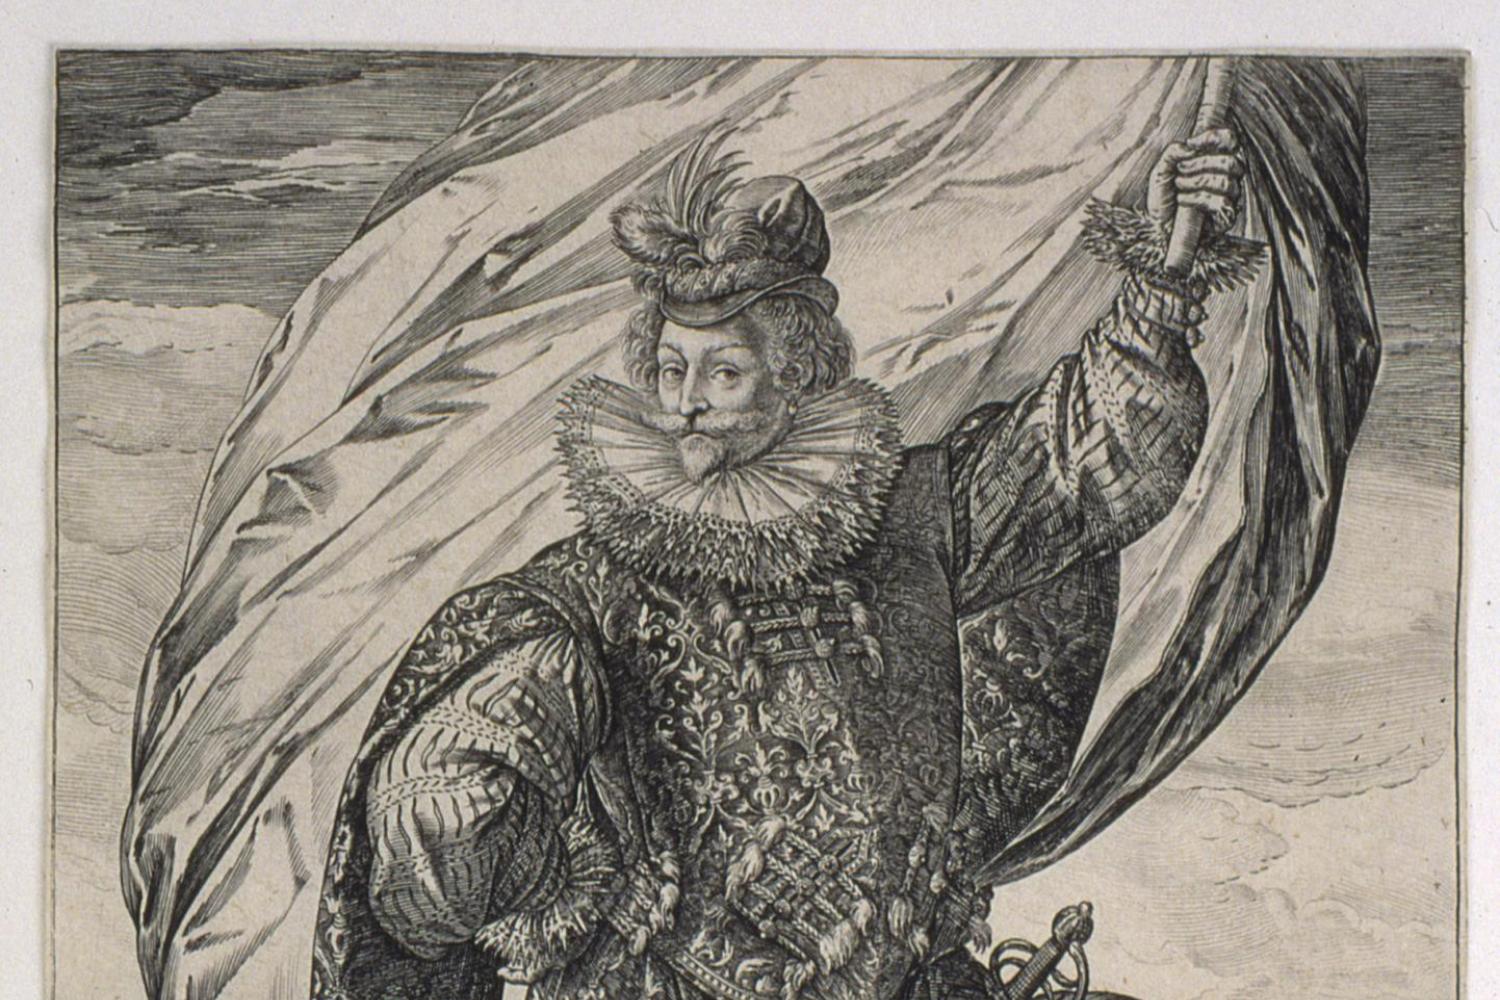 A black and white print of a very fancily dressed European man wearing a ruffled collar and patterned clothing. He has a mustache and is smiling while dramatically holding up a large piece of cloth that is blowing in the wind.